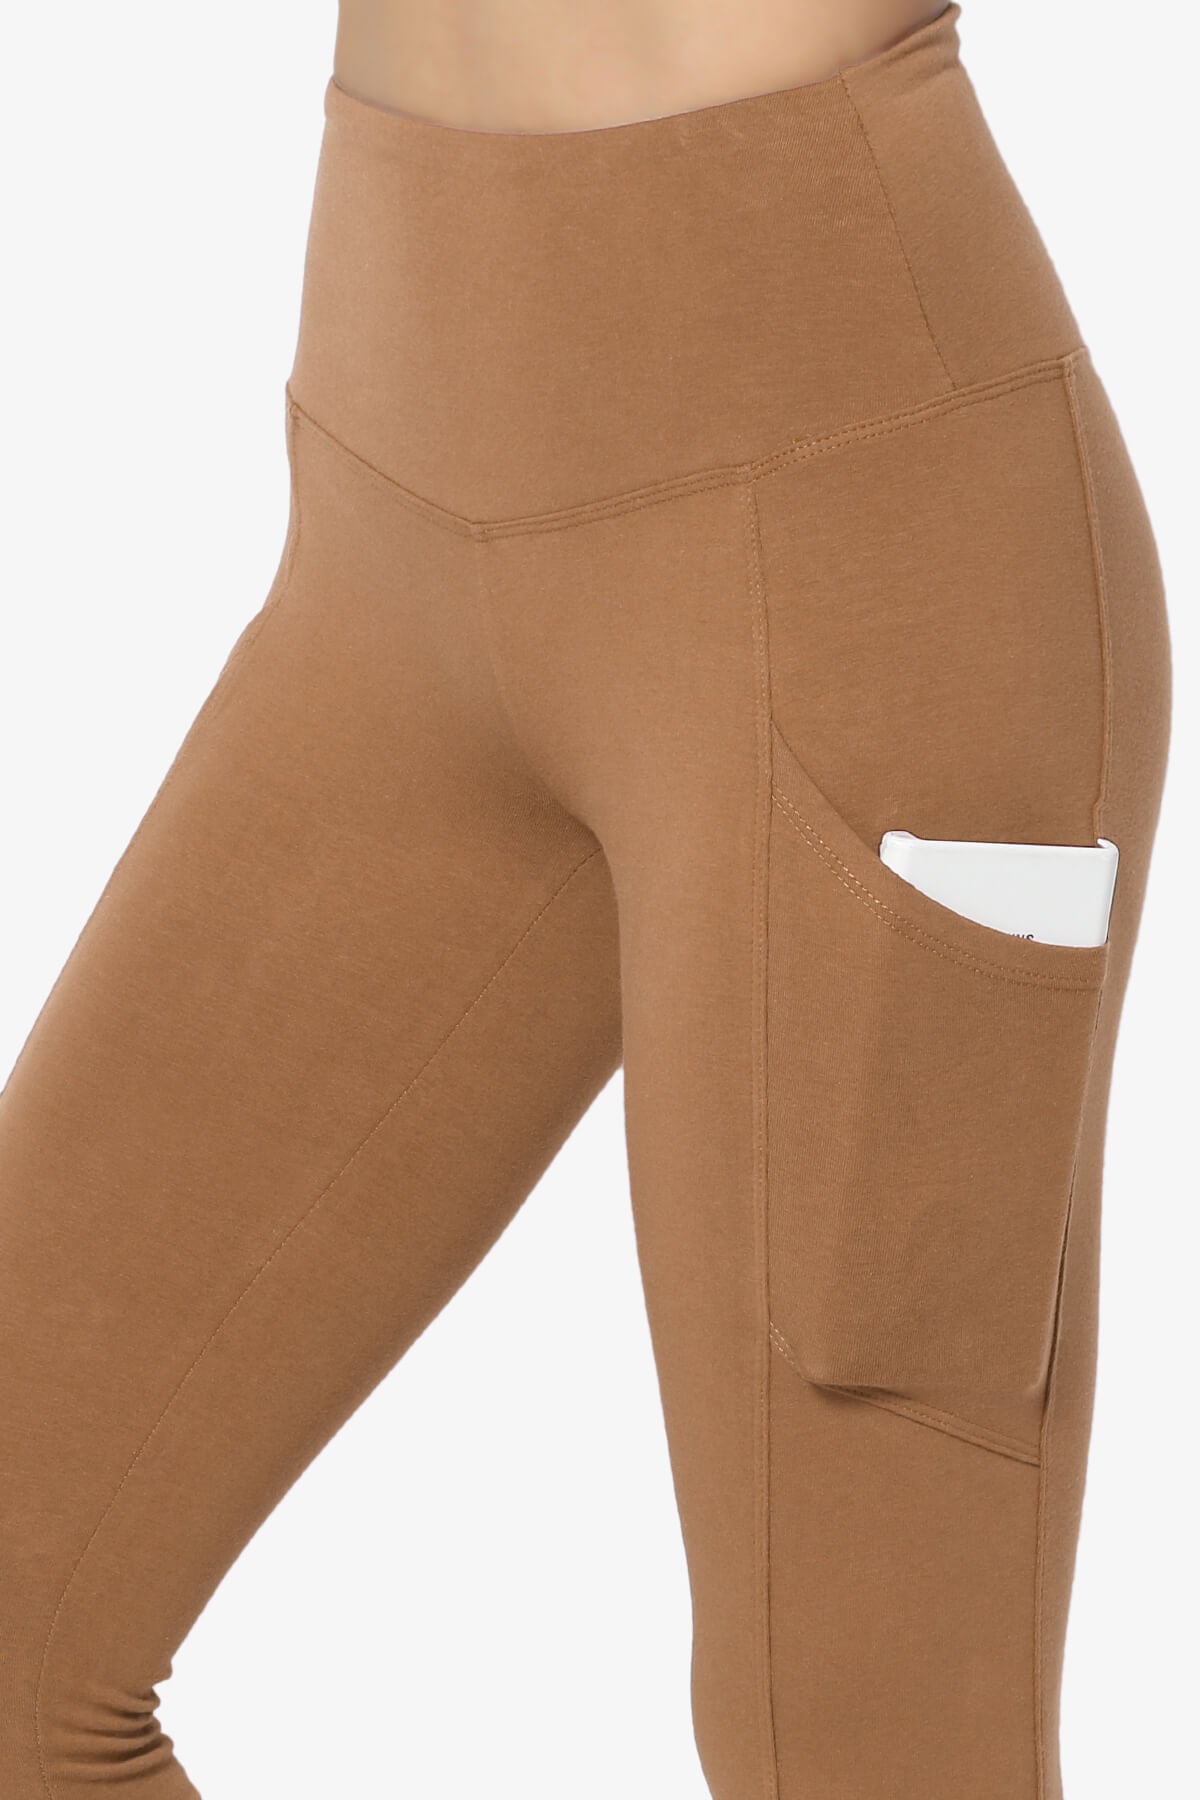 Ansley Luxe Cotton Leggings with Pockets DEEP CAMEL_5